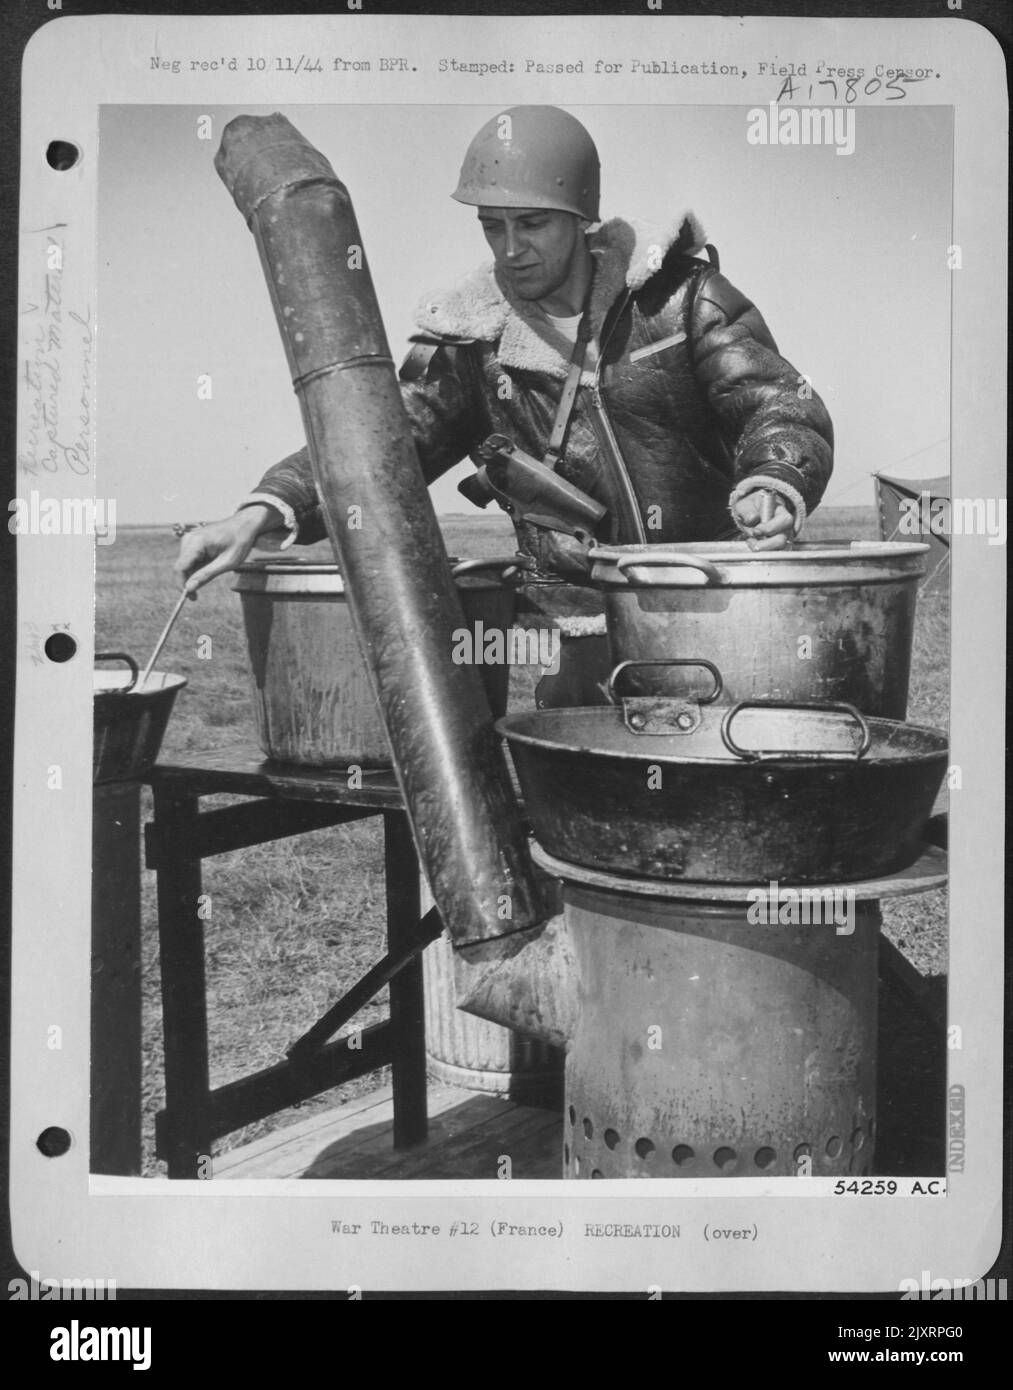 FRANCE-Meals at a captured German field are cooked on a German field range by Sgt Clyde E. Hall, 35, of Dayton, Ohio. Hall and everyone else keep their guns with them all the time because a force of 20,000 Germans under Maj Gen Erich Elster are just Stock Photo